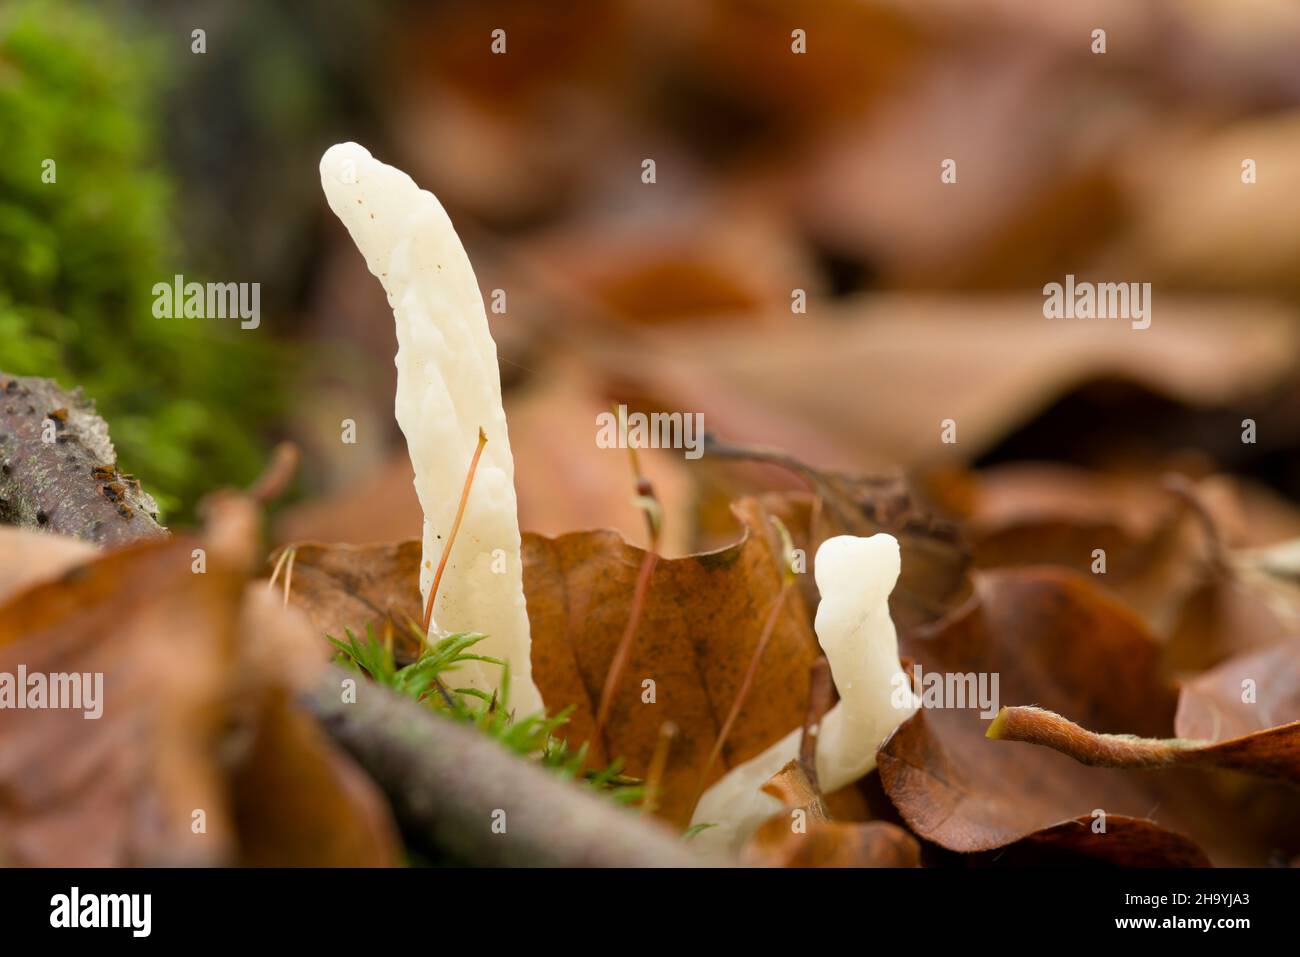 Wrinkled Club Fungus (Clavulina rugosa) fungus in the leaf litter of a beech woodland at Goblin Combe, North Somerset, England. Stock Photo